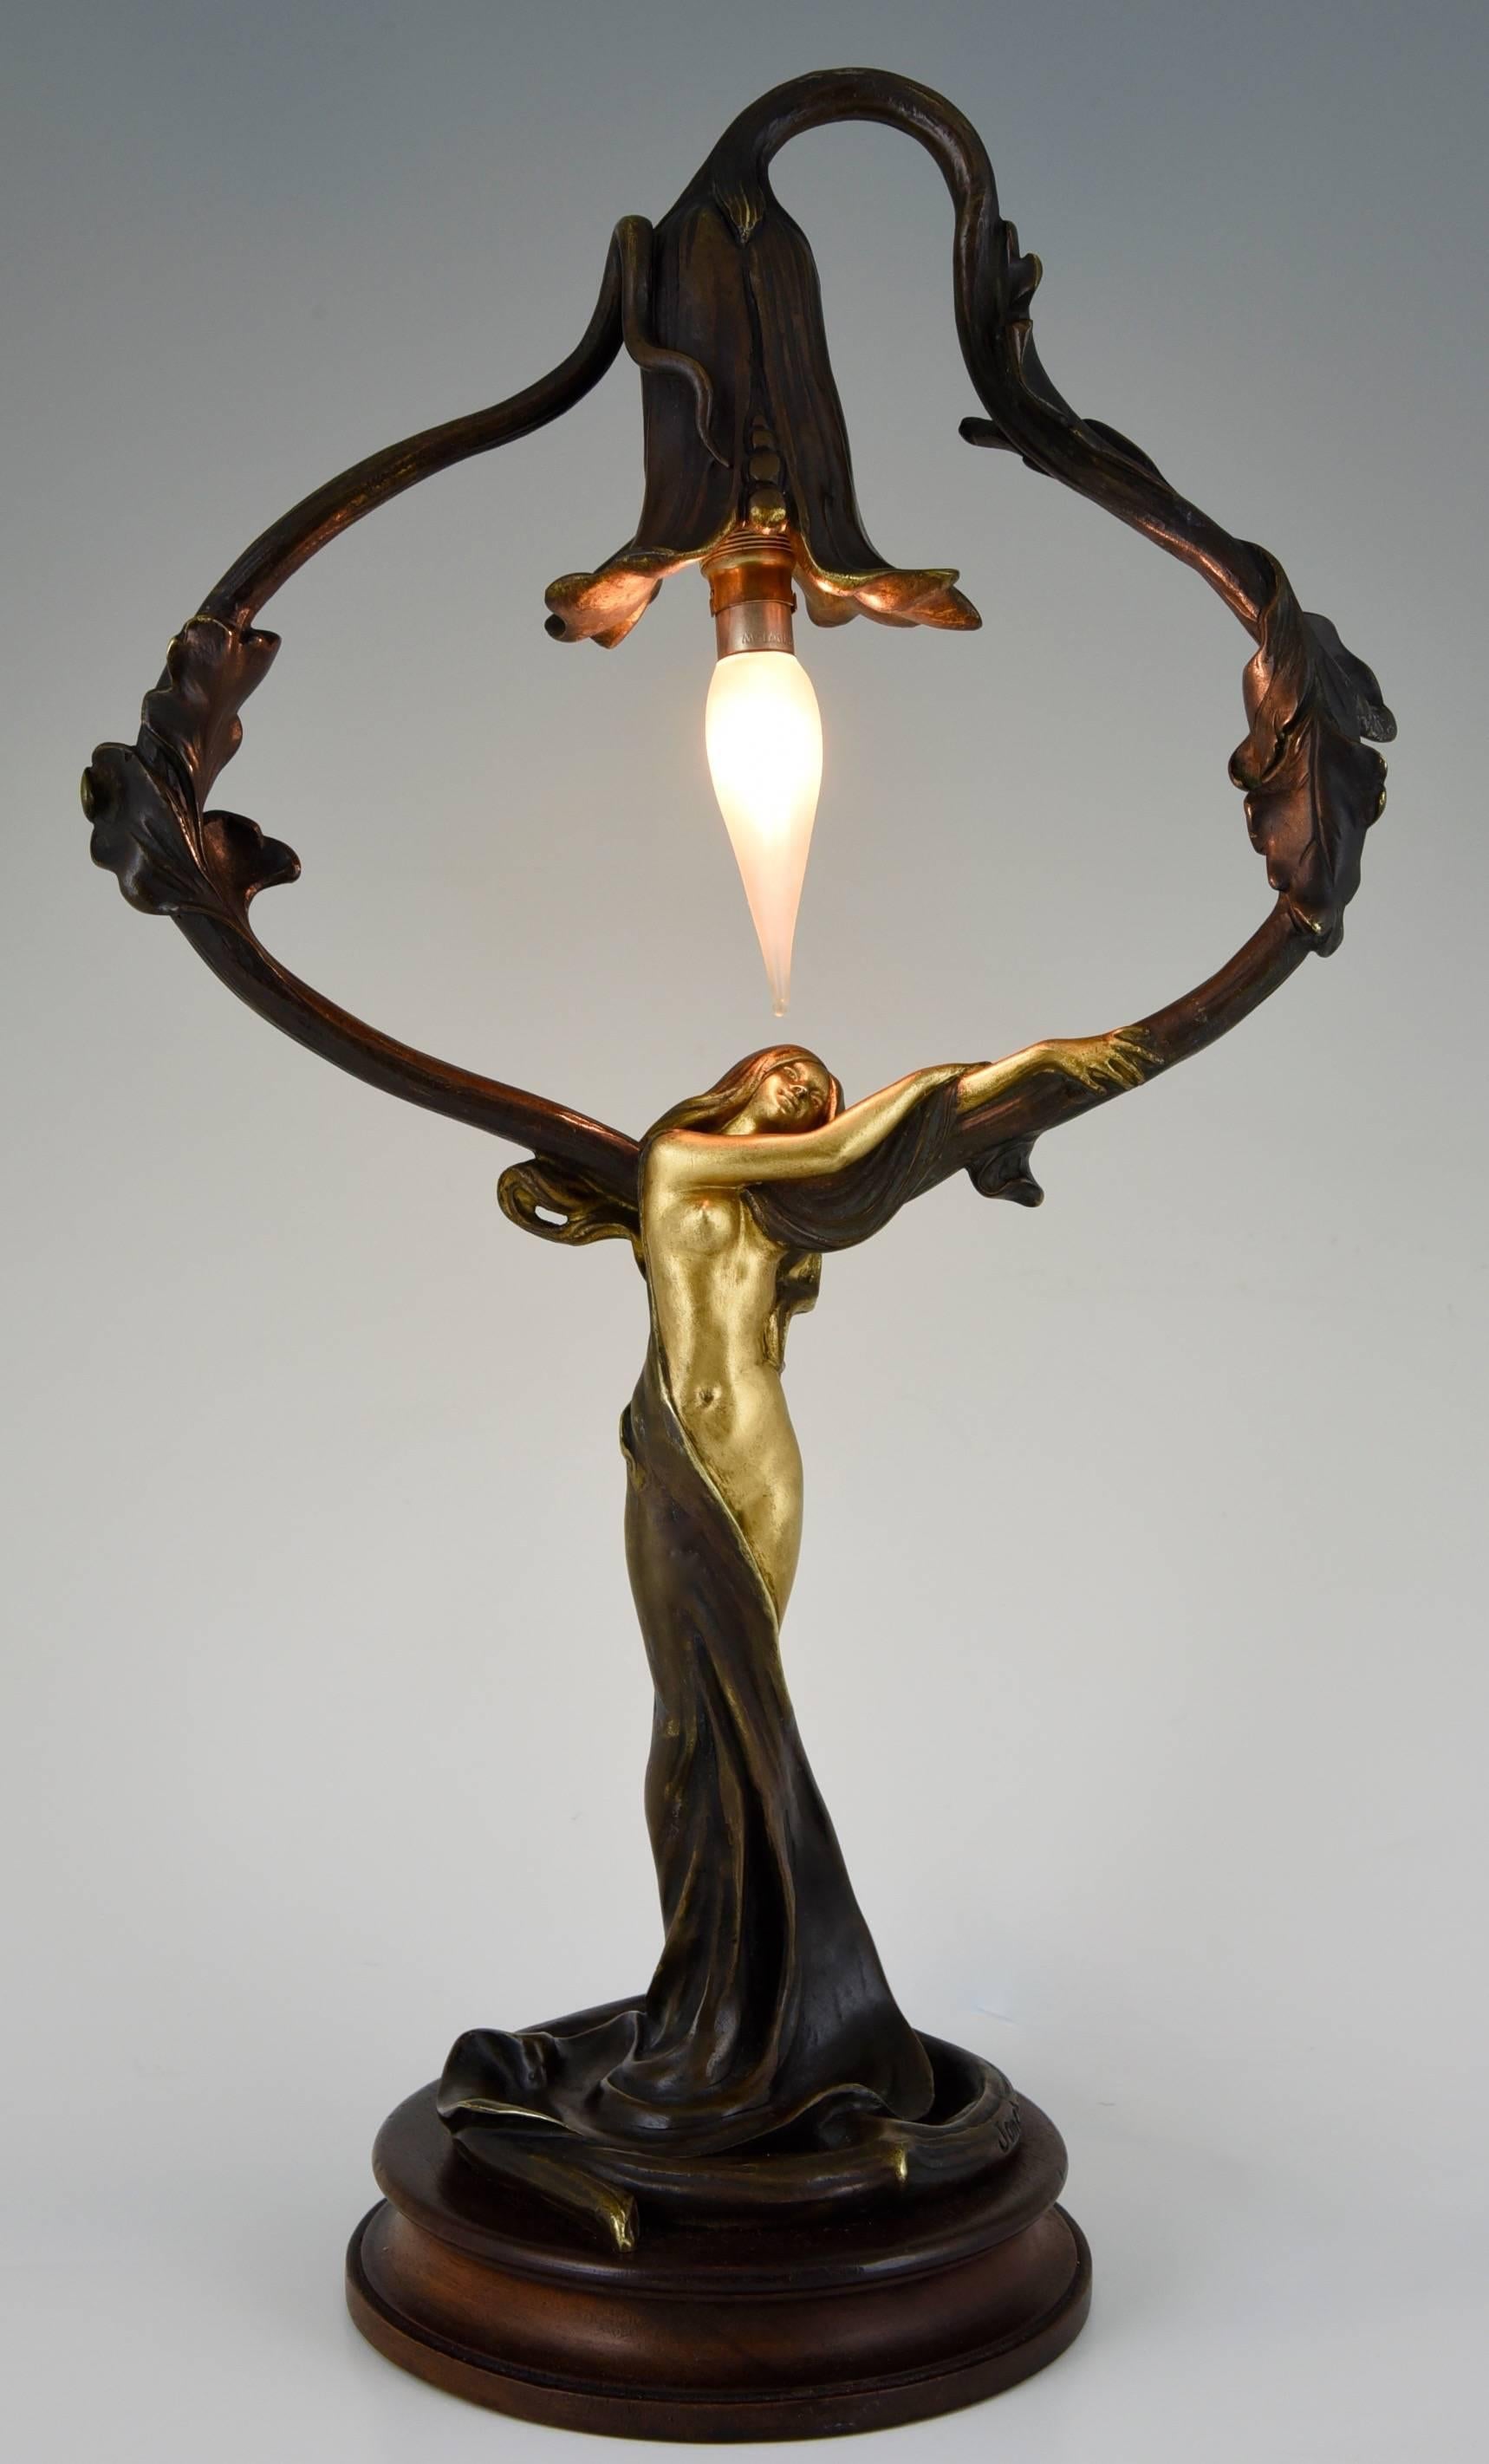 Description: An Art Nouveau gilt an patinated bronze lamp with nude and flower. 
Artist / Maker:  Charles Emile Jonchery. 
Signature / Marks: Jonchery. 
Style:  Art Nouveau. 
Condition: Good original condition. Re-wired for European electricity.